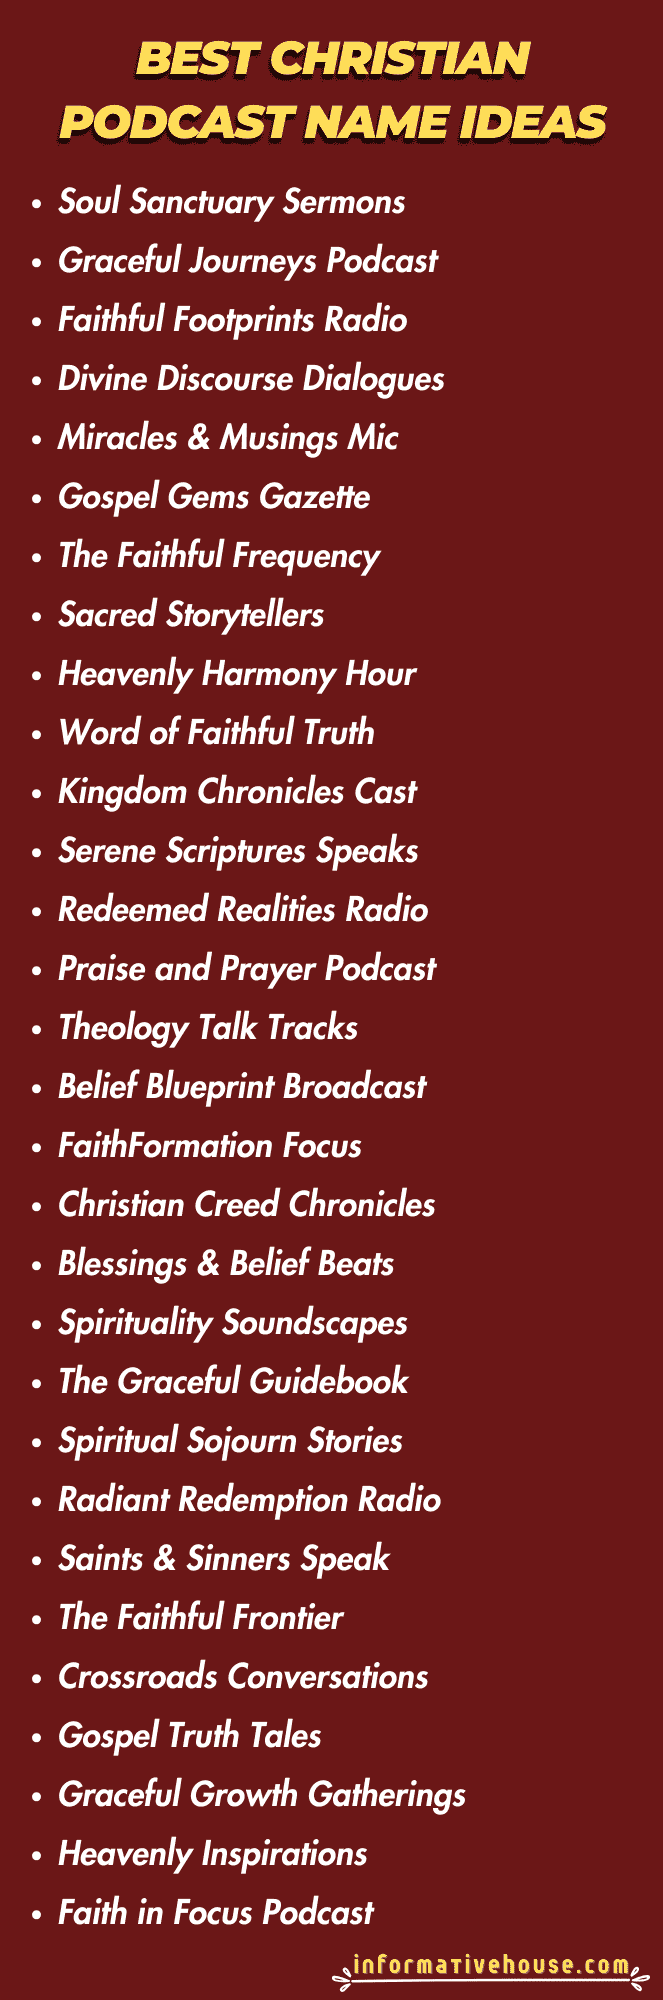 Best Christian Podcast Name Ideas for startup